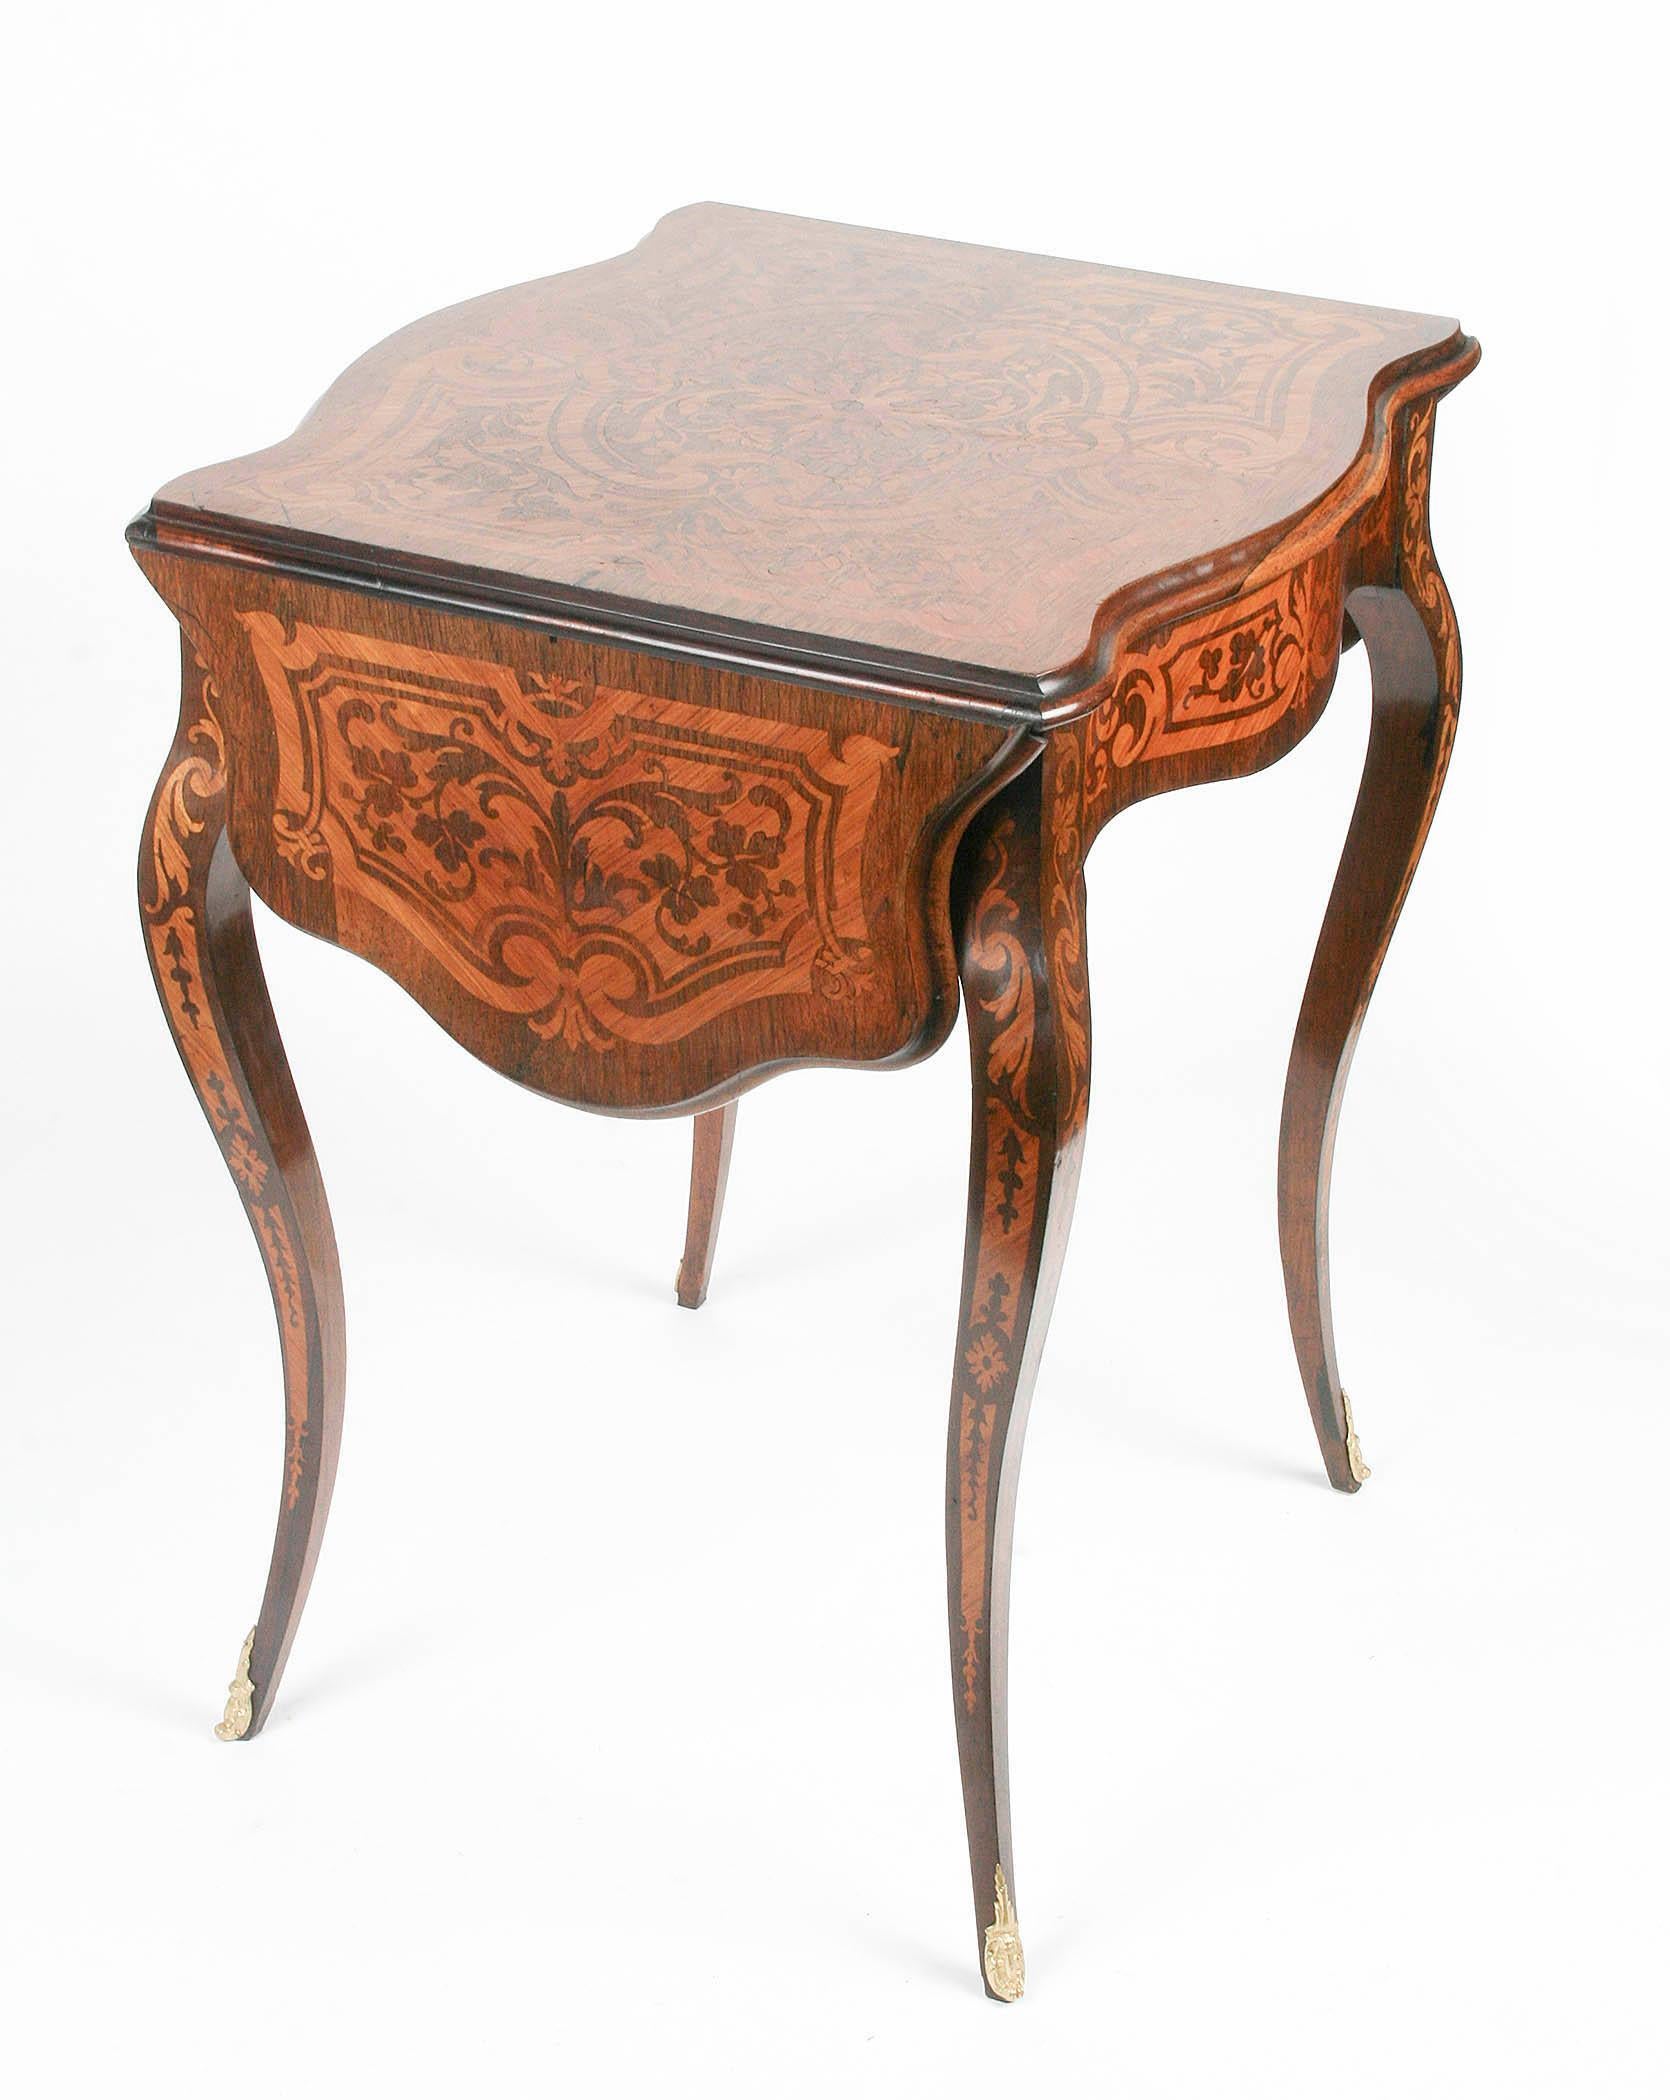 19th Century French Marquetry Drop-Leaf Table In Excellent Condition For Sale In Casteren, Noord-Brabant